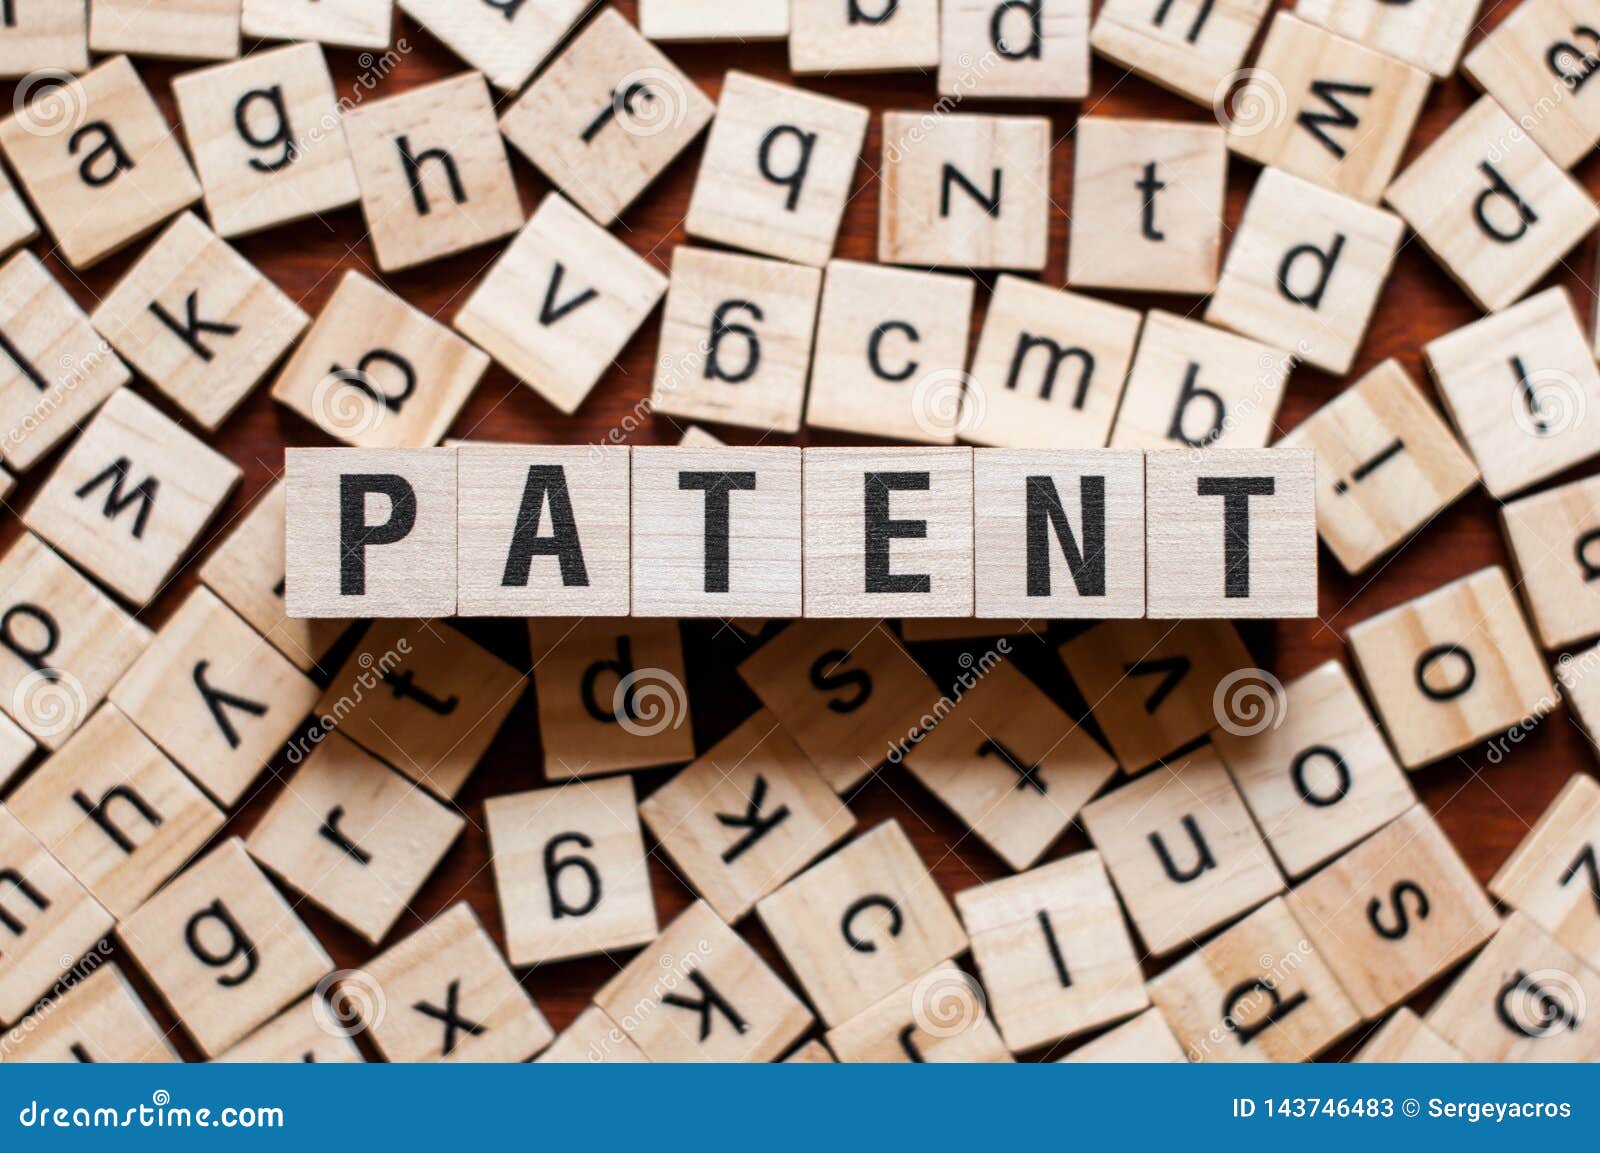 patent word concept